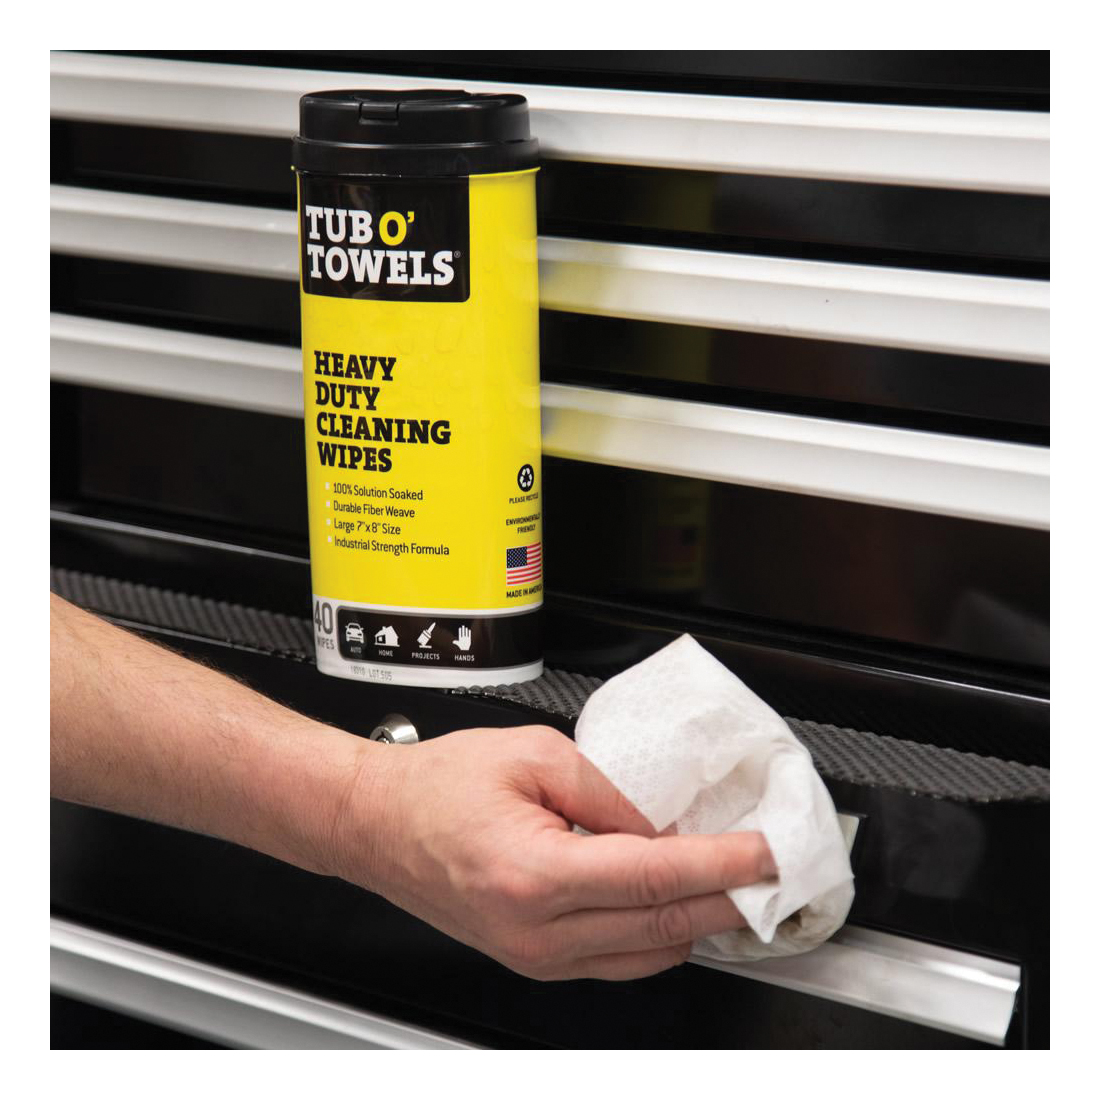  Tub O' Towels - TW40CHR - Heavy Duty Chrome Wipes – Clean,  Shine & Protect, 40 Count Wipes : Automotive